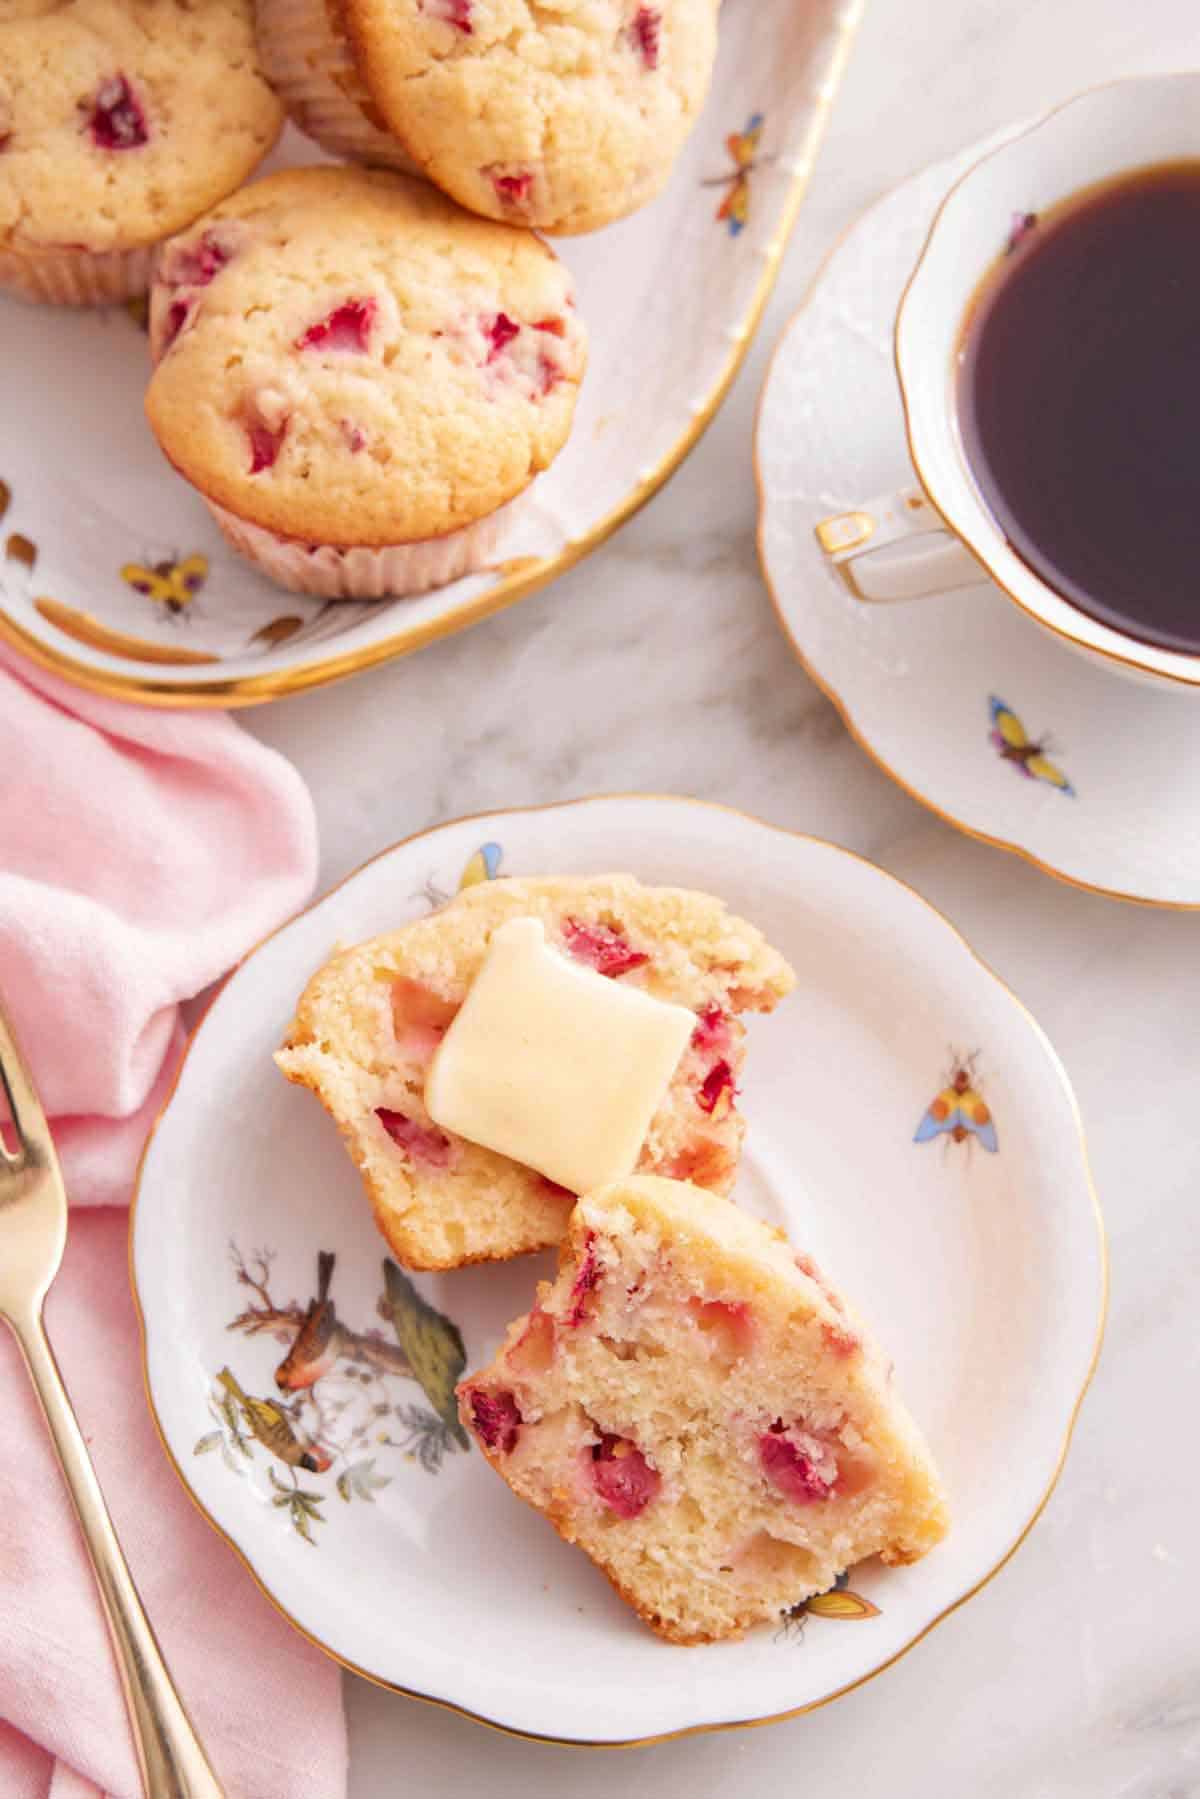 Overhead view of a plate with a strawberry muffin cut in half with a knob of butter. A cup of coffee and more muffins beside it.